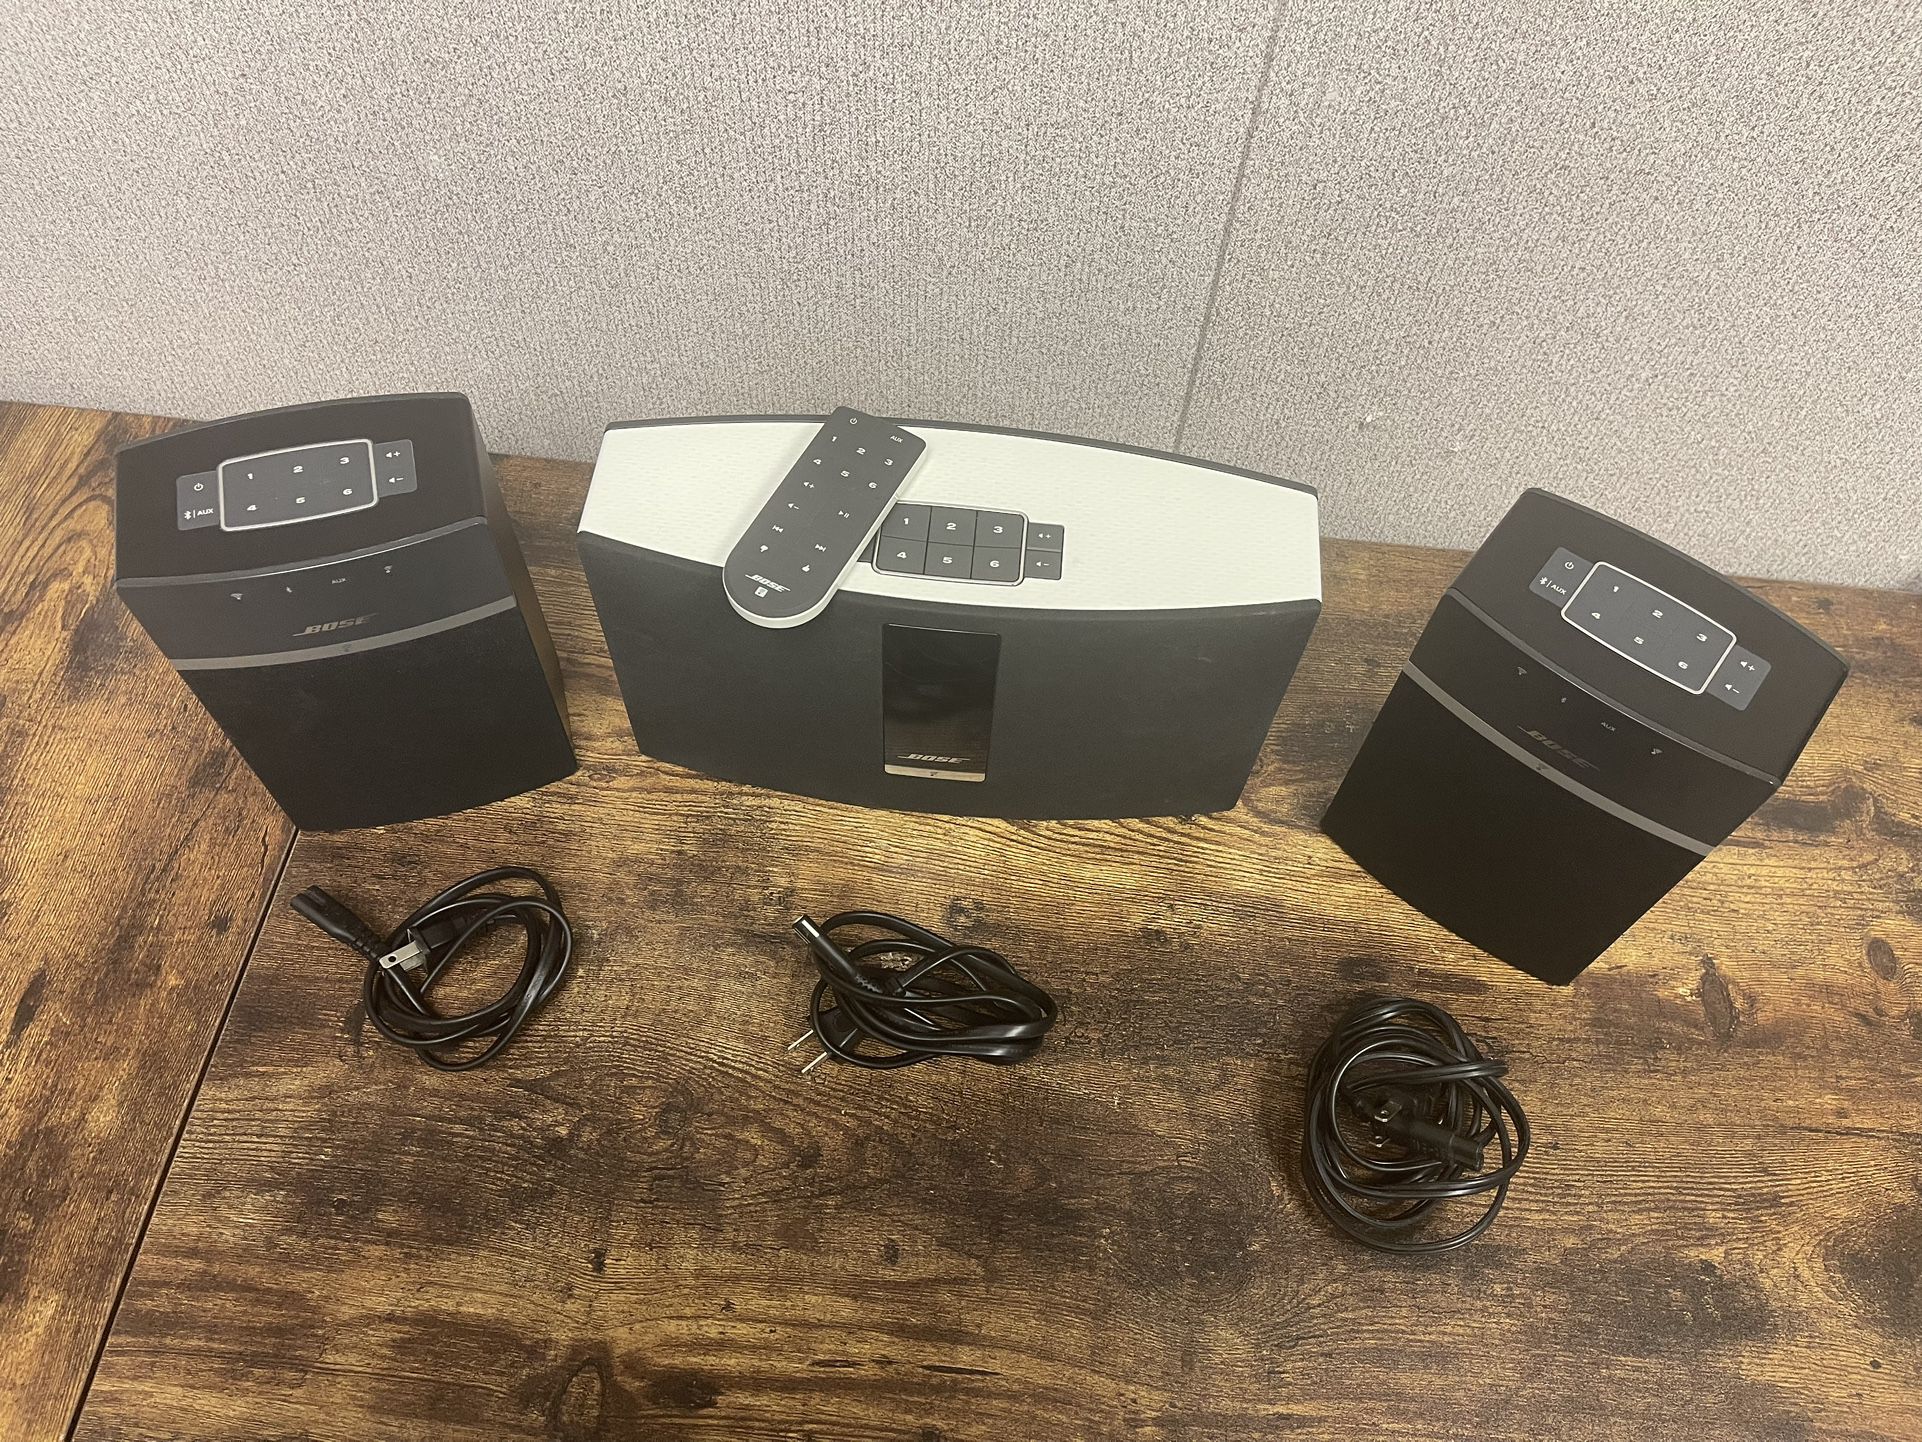 20 & Bose Soundtouch 10 (2) for in Pearland, TX - OfferUp